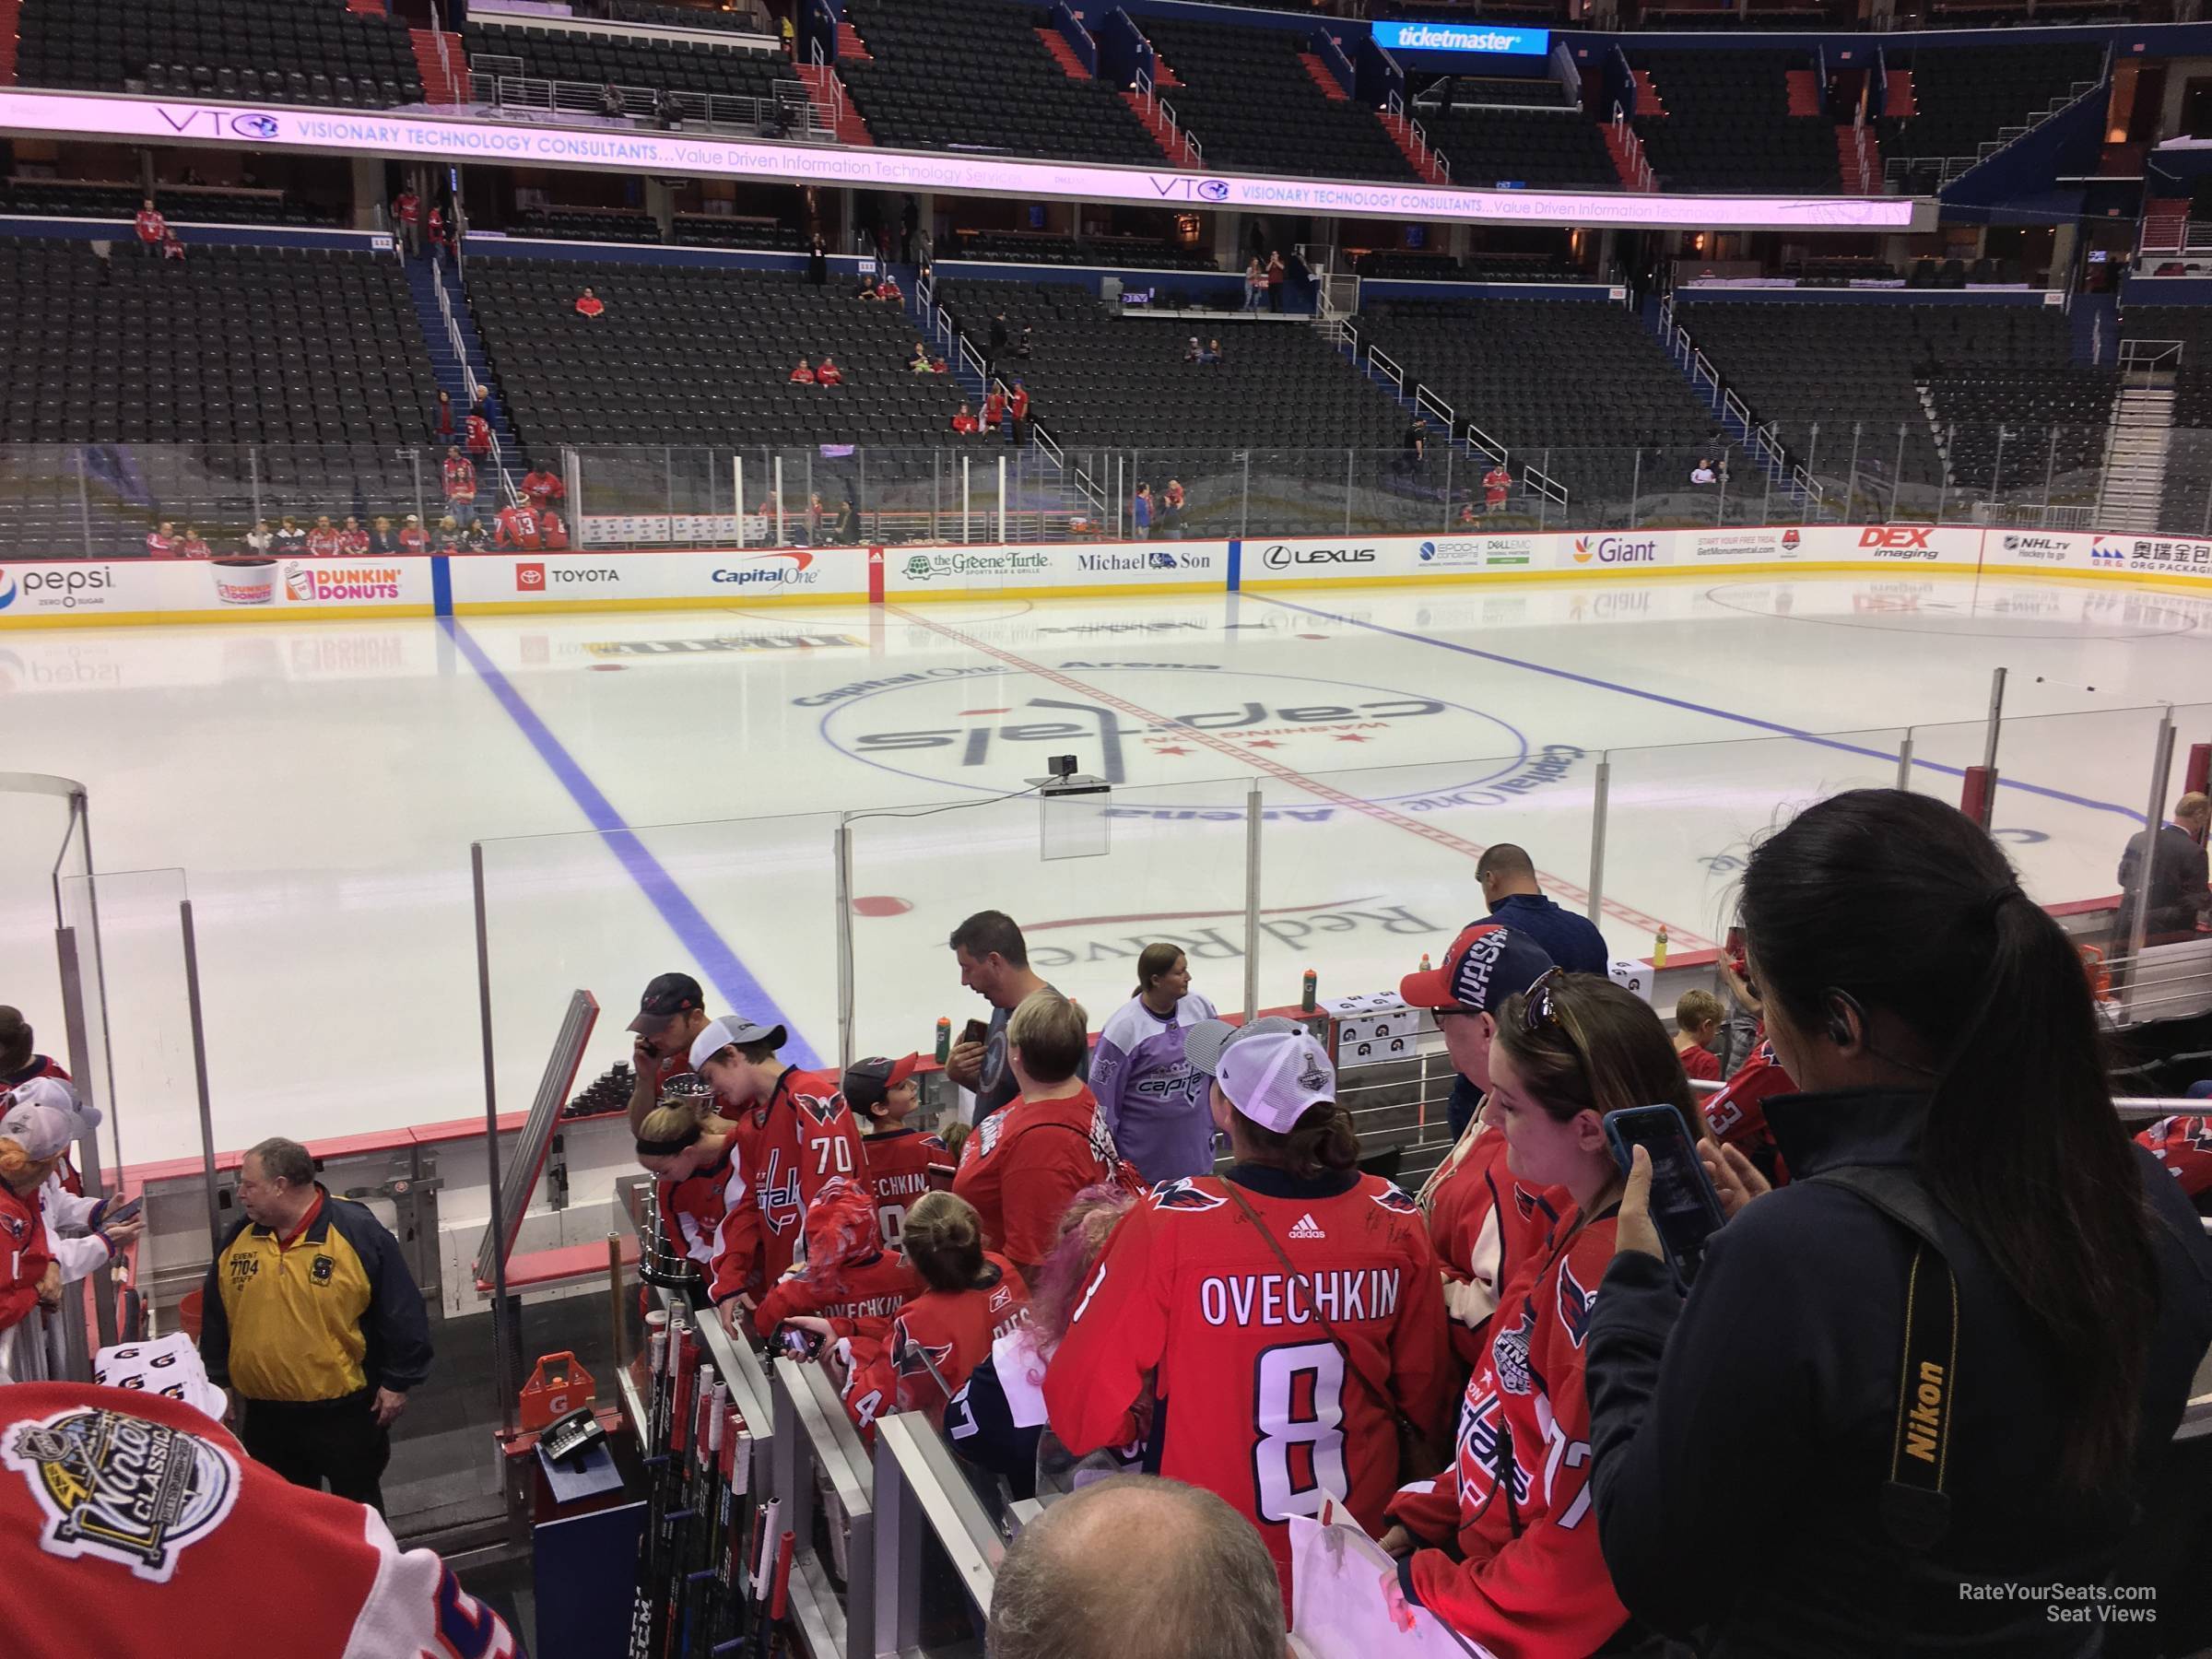 Washington Capitals Seating Chart With Seat Numbers